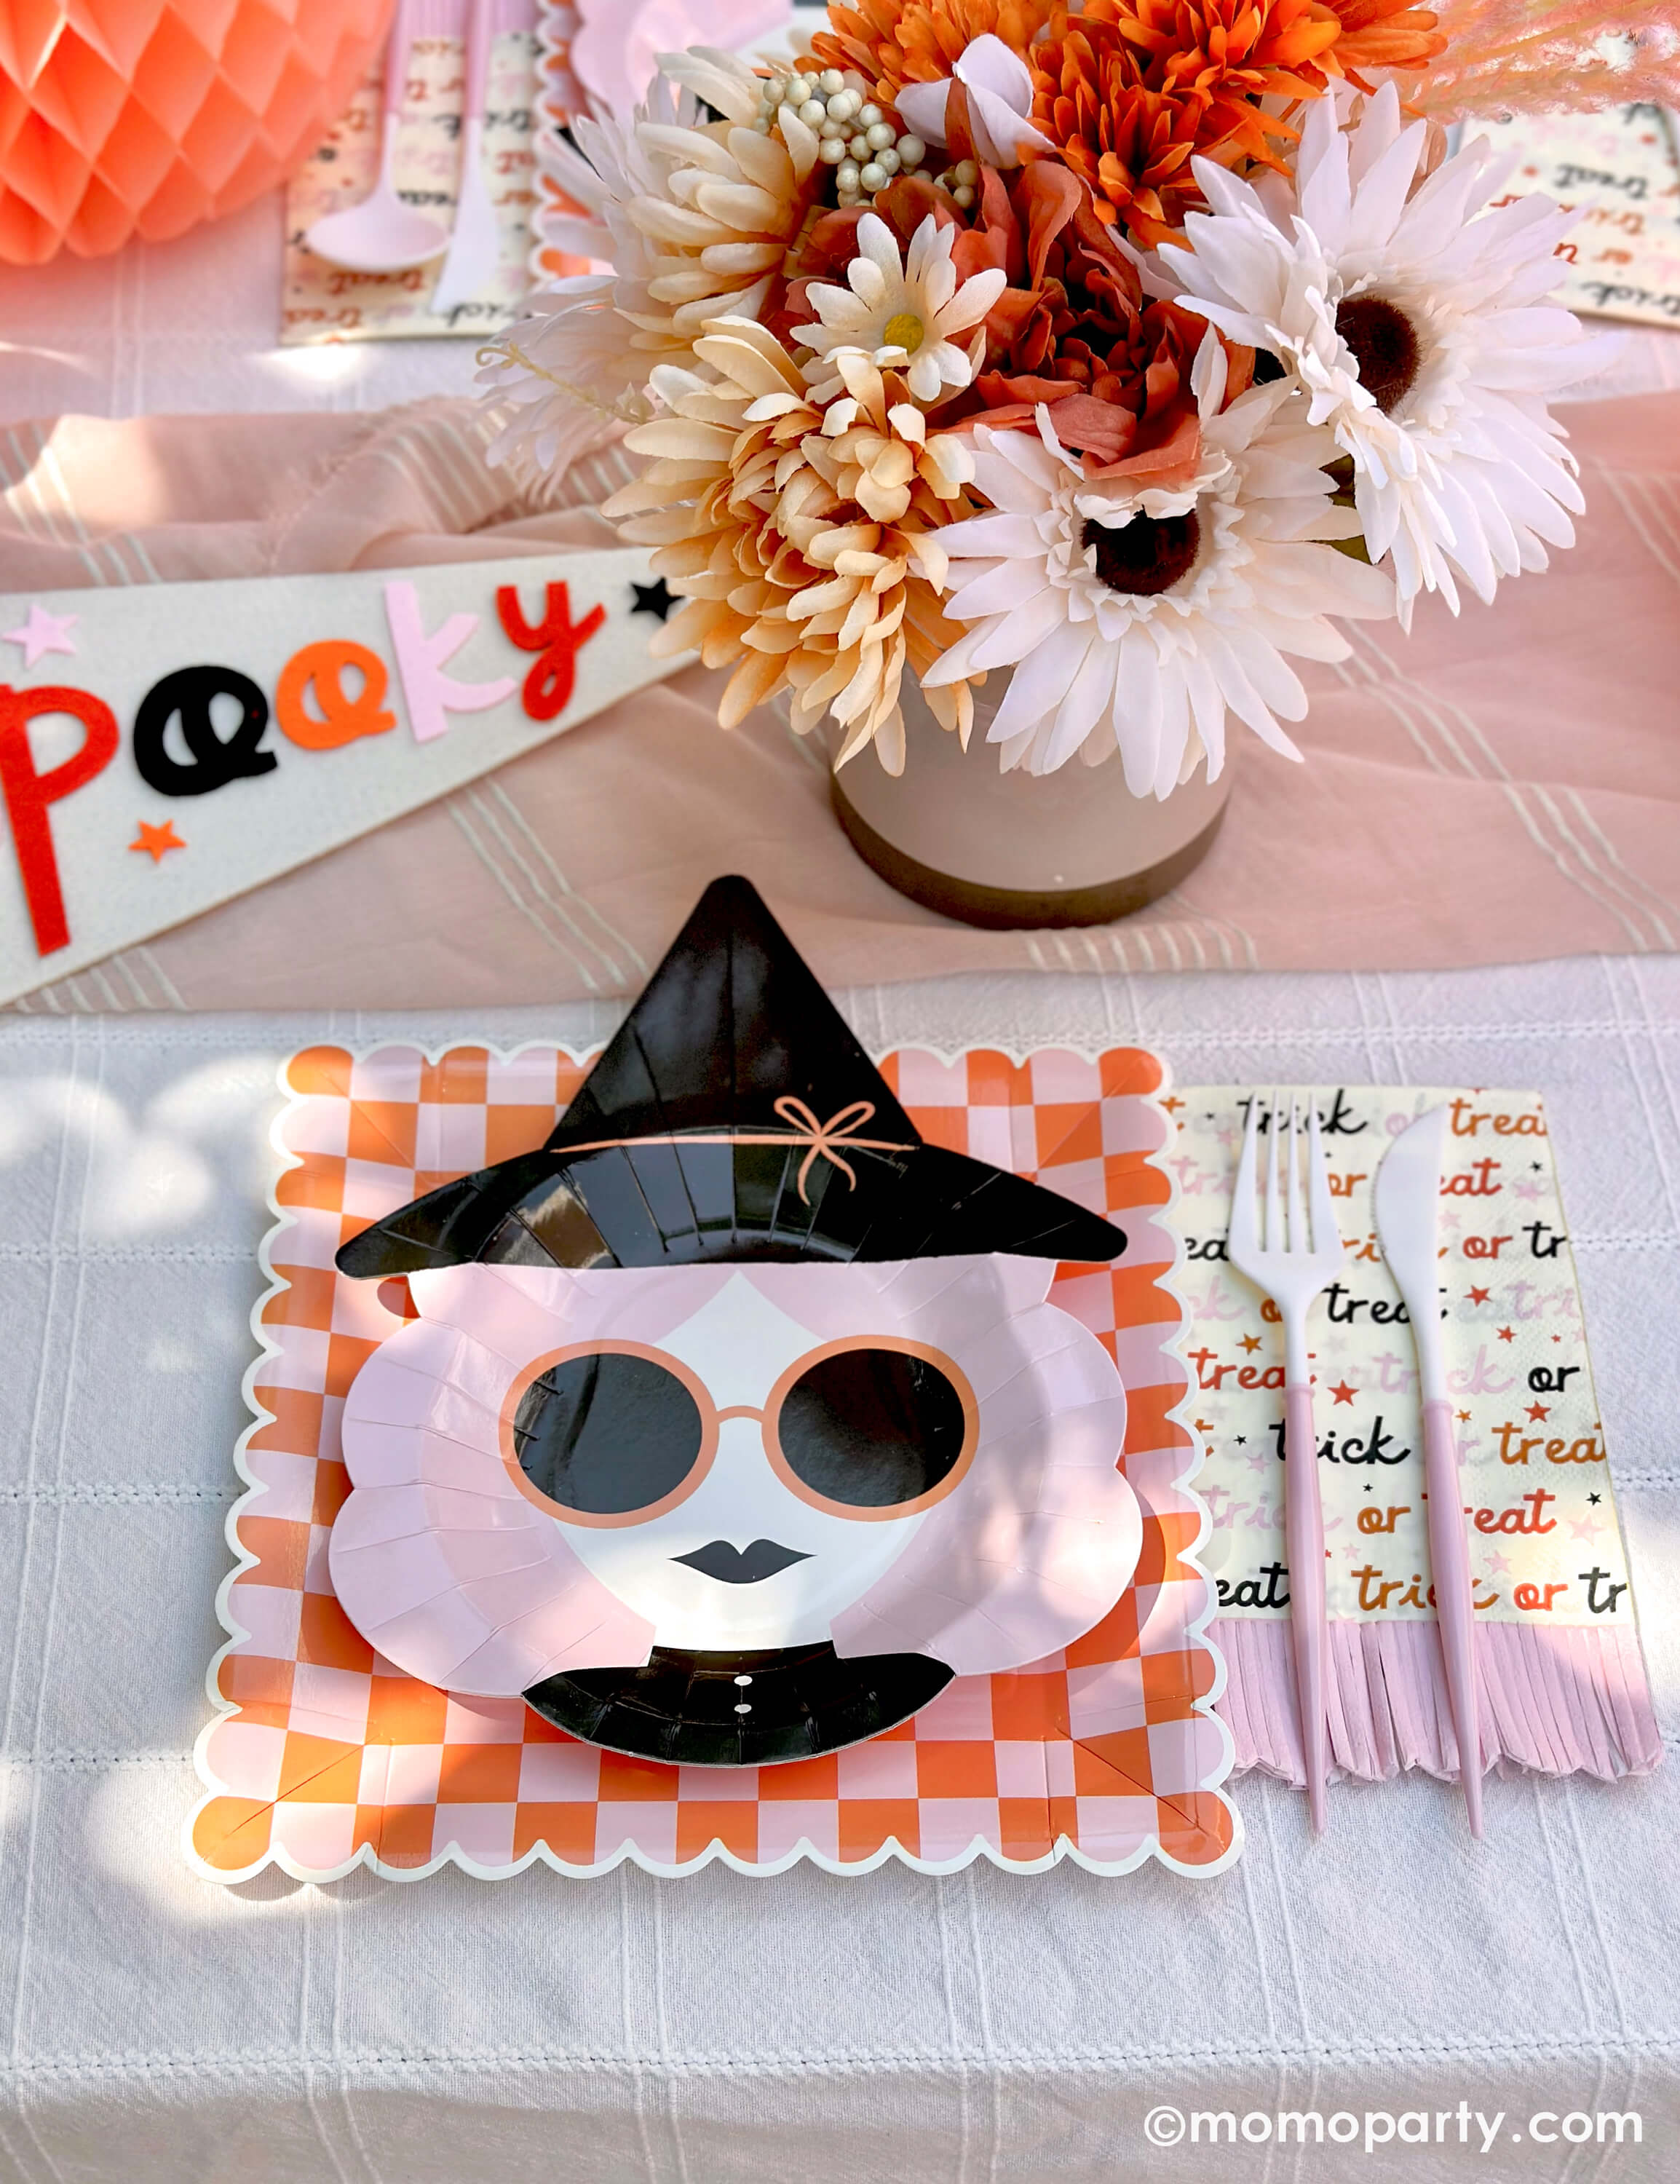 A pink Halloween table featuring Momo Party's pink witch plates paired with orange/pink checkered plates, trick or treat patterned guest towels with pastel pink fringe, and blush and white cutlery, with boho vibe fall flower arrangement and pastel peach honeycomb pumpkins as the centerpiece, and a felt party pennant that has "spooky" written on, this tablescape gives a great inspiration for a modern and chic Halloween party table decoration ideas.